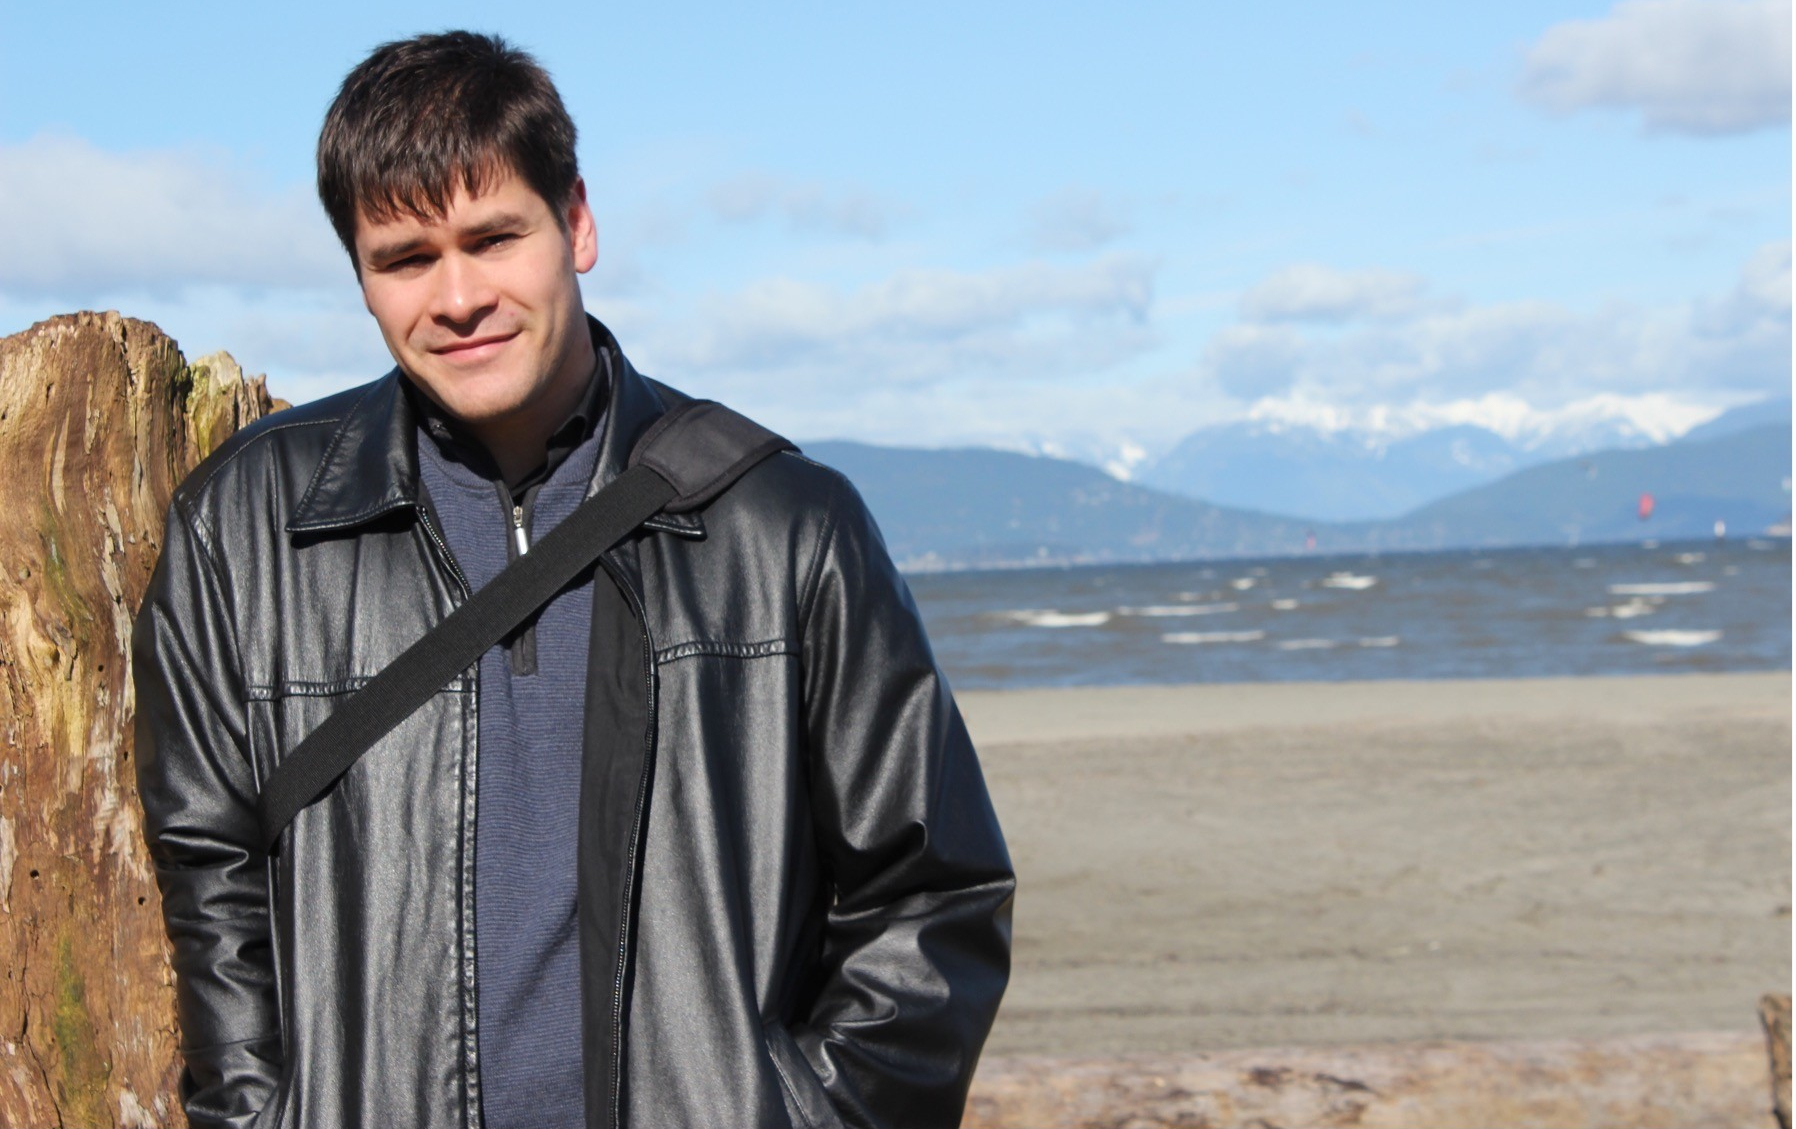 Meet Our Newest Faculty: Dr. Dustin King on His Exploration of Weaving Western Science with Indigenous Ways of Knowing